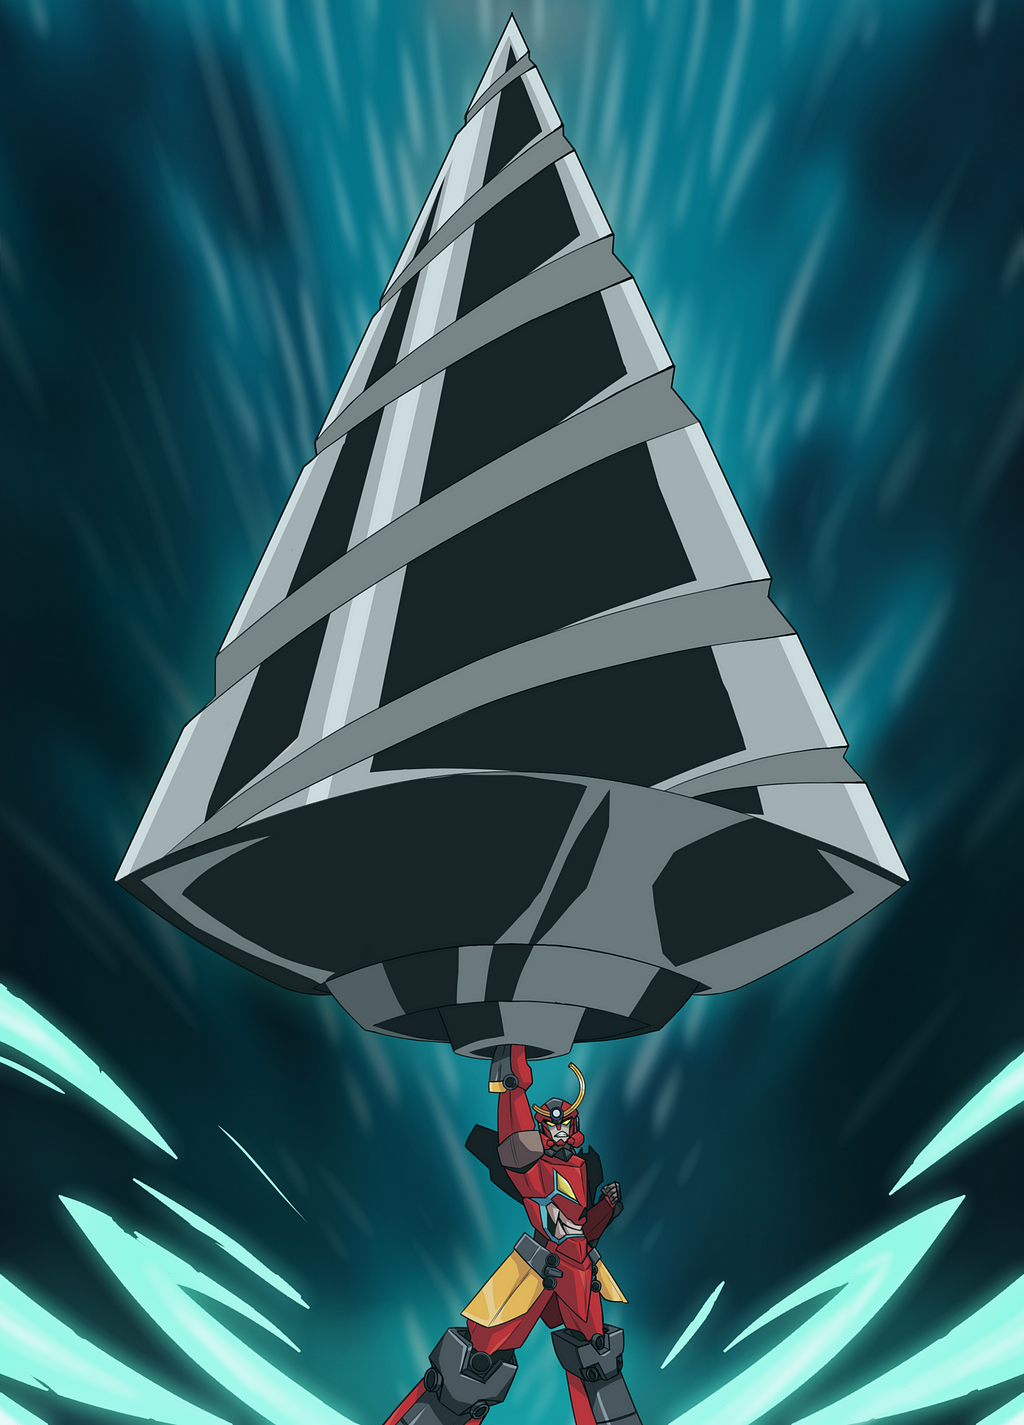 An artwork depicting a mecha-robot from the anime Tengen Toppa Gurren Lagann with a giant drill above it’s head pointing upward.